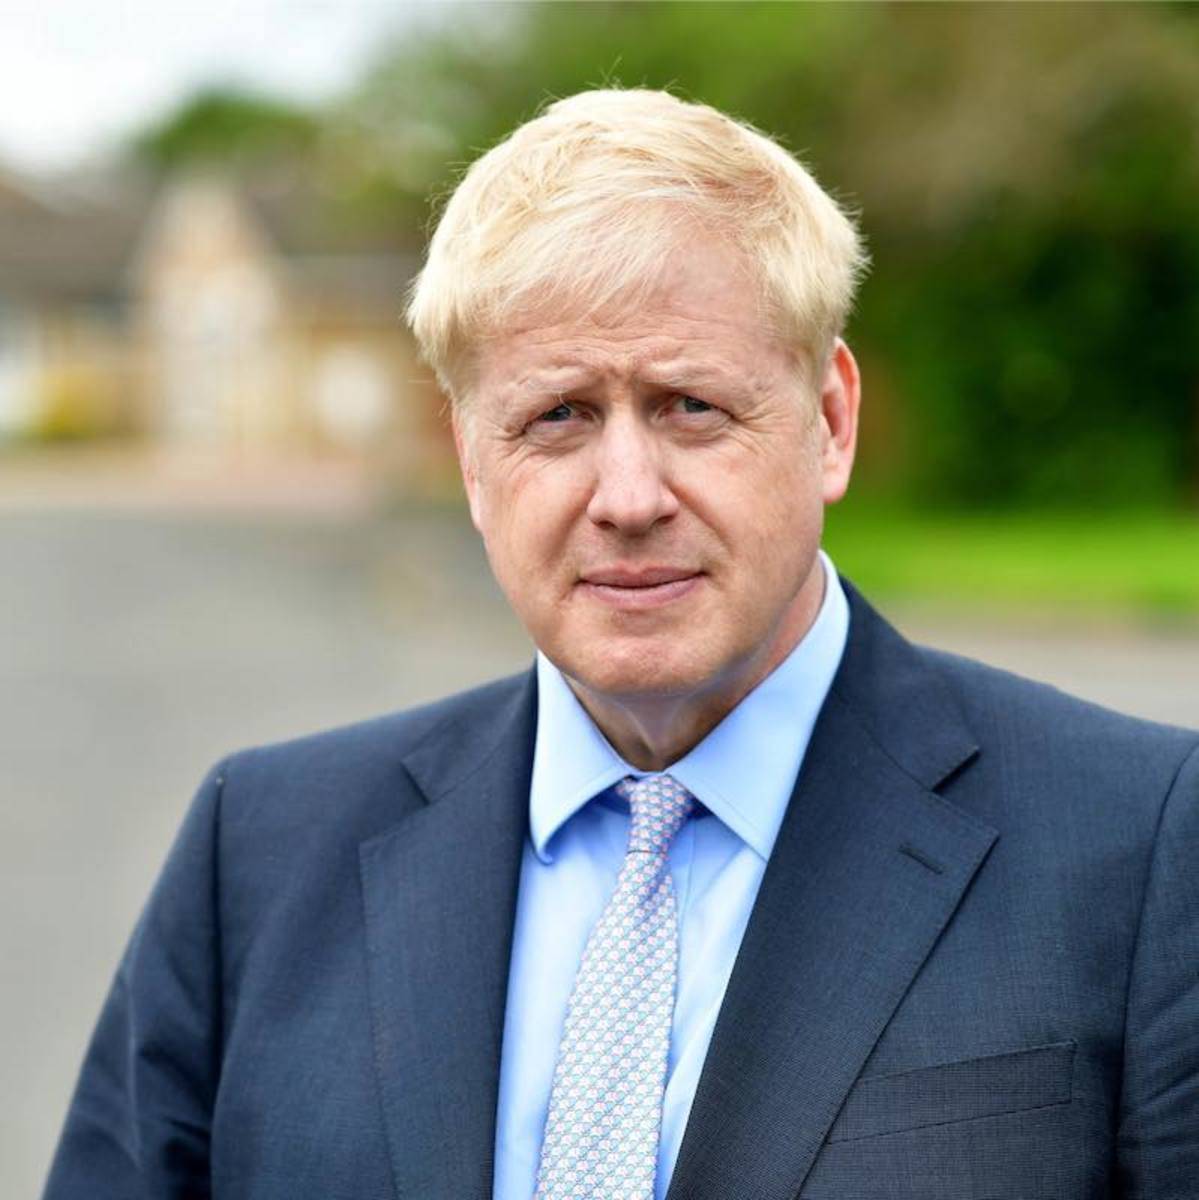 boris-joked-about-rule-of-six-helps-people-avoid-the-mother-in-law